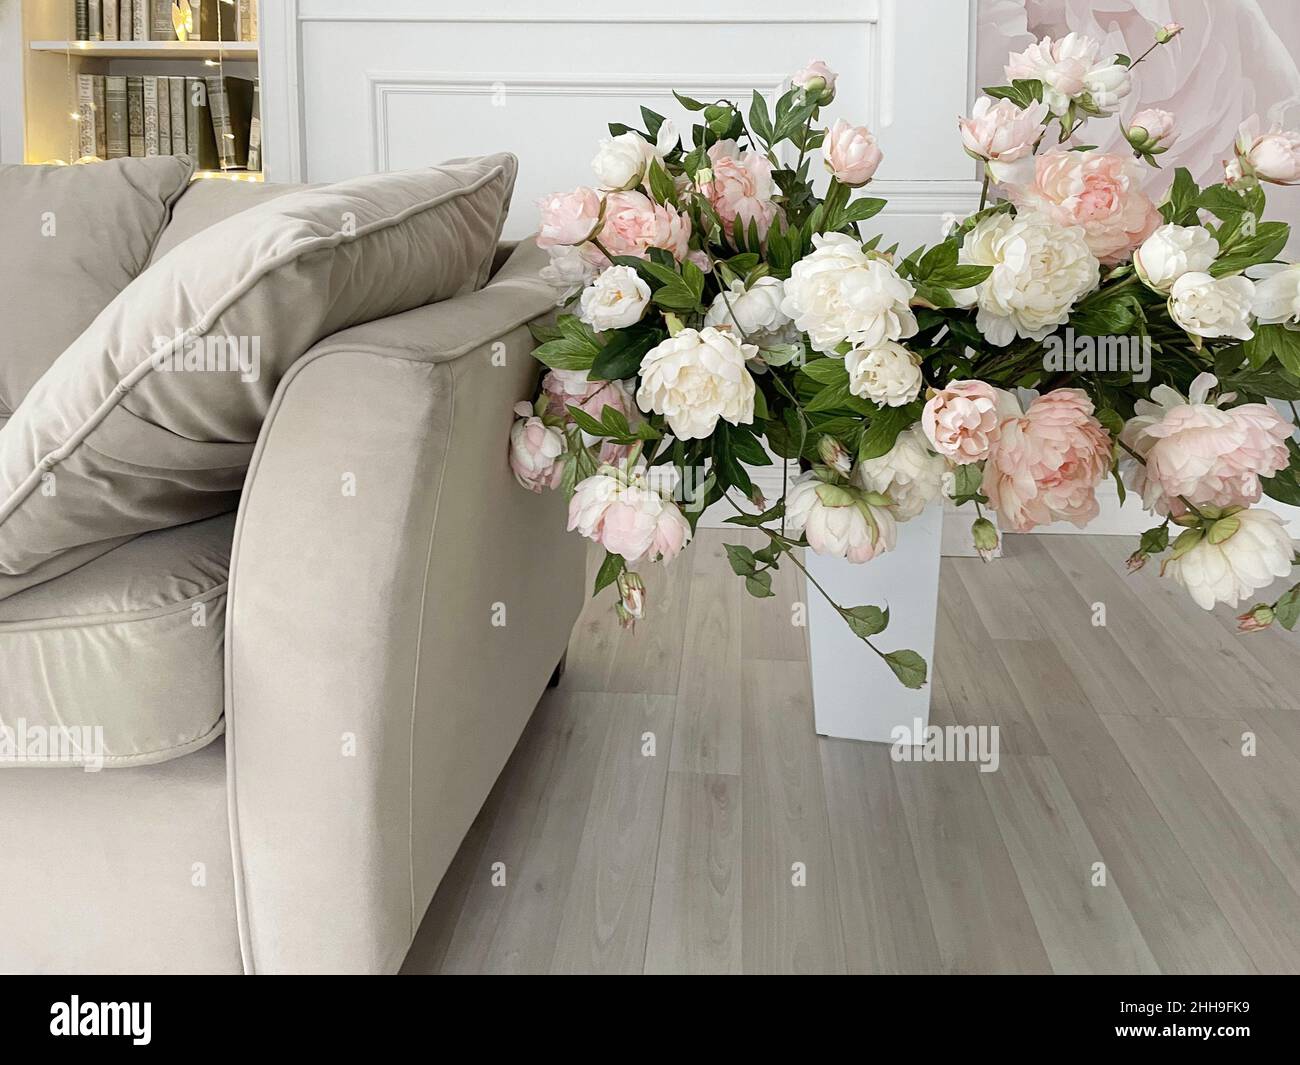 Vase with artificial flowers in the home interior, the concept of a cozy room Stock Photo